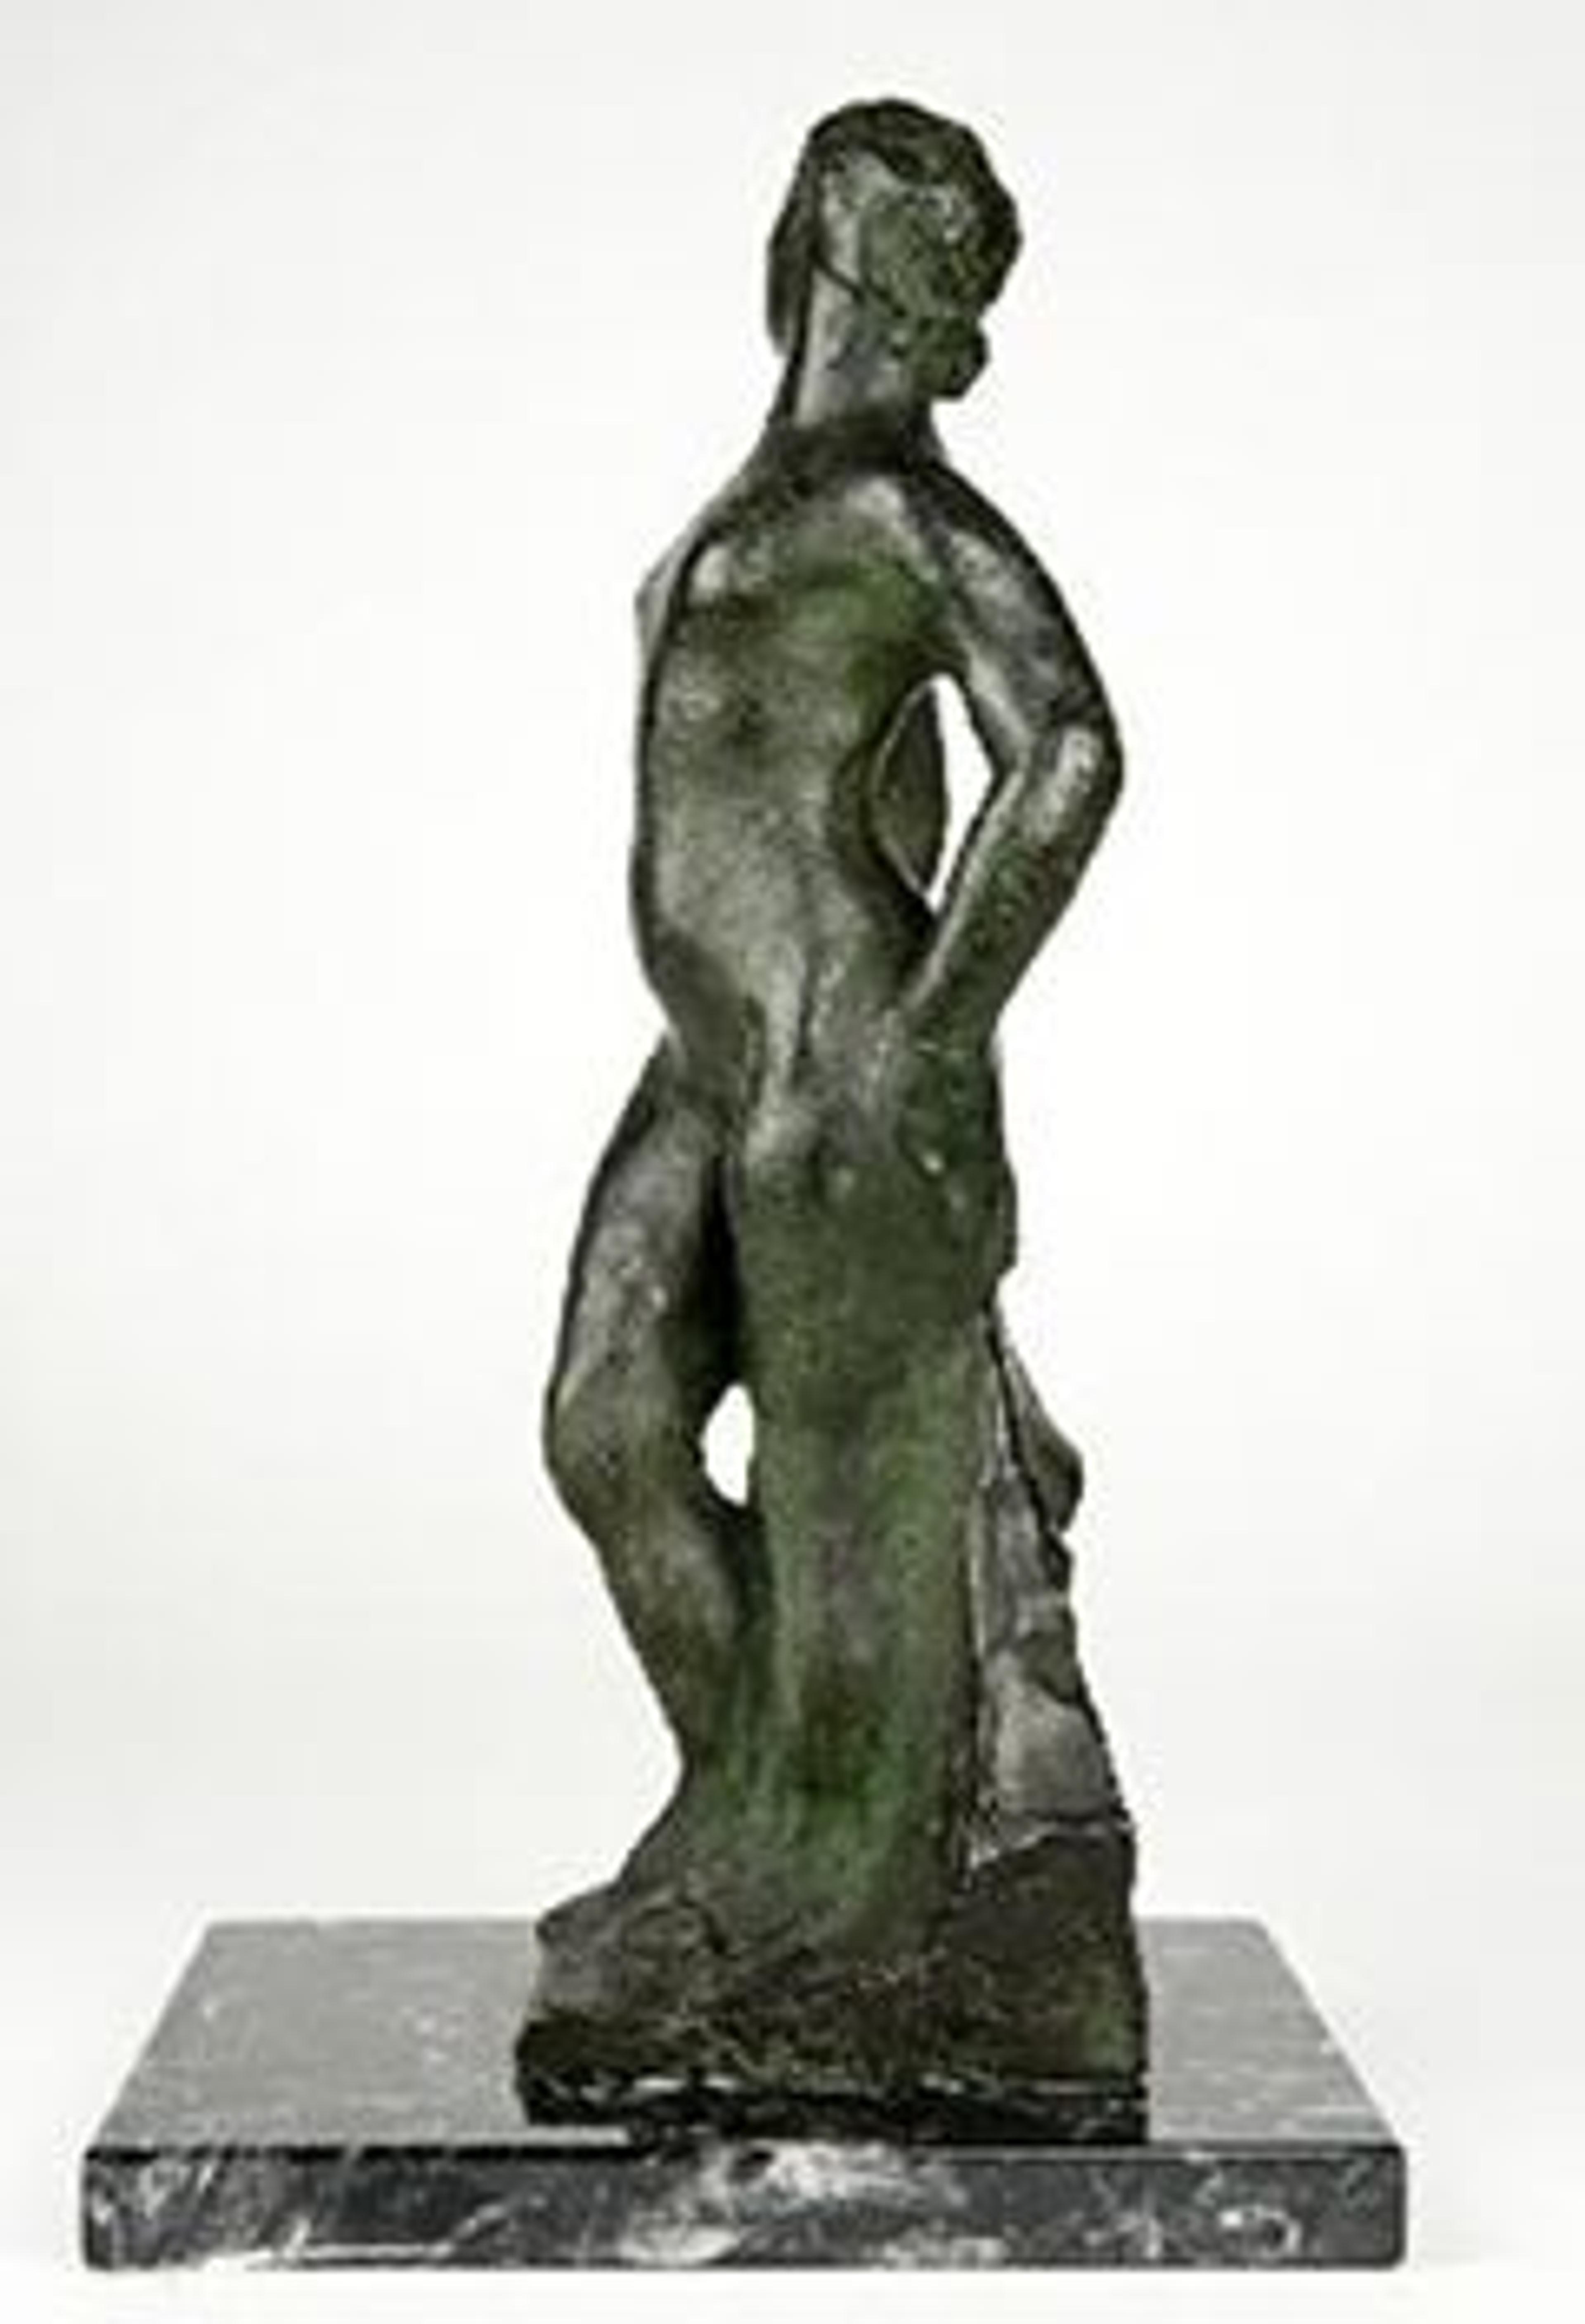 Rodin at The Met